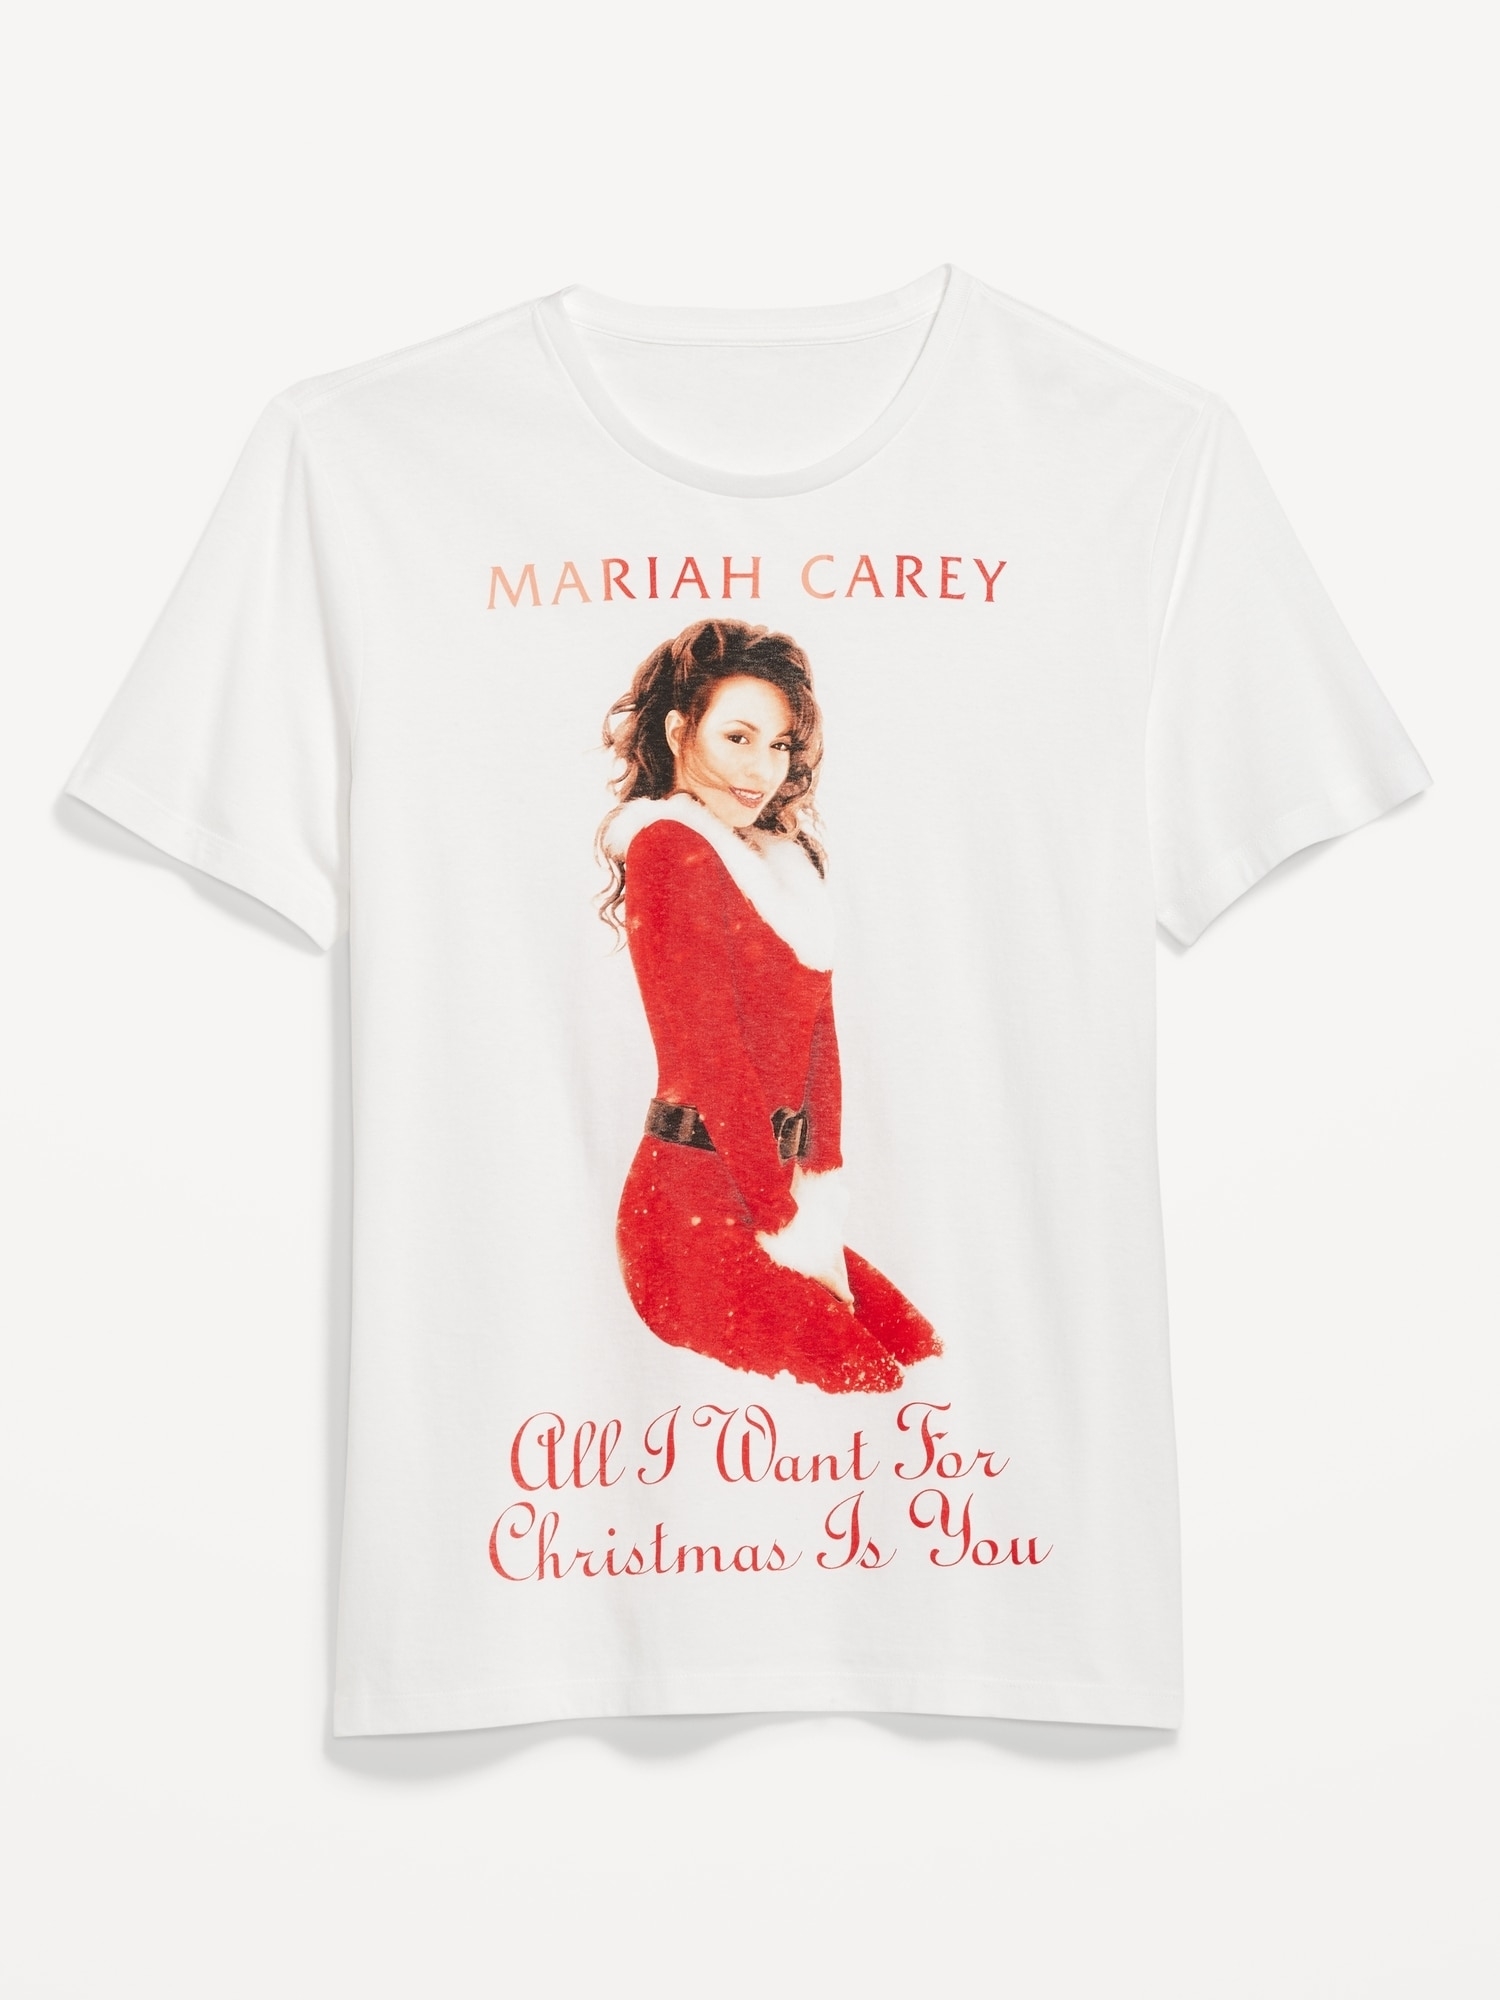 a white tee with mariah carey on it and &quot;all i want for christmas is you&quot;